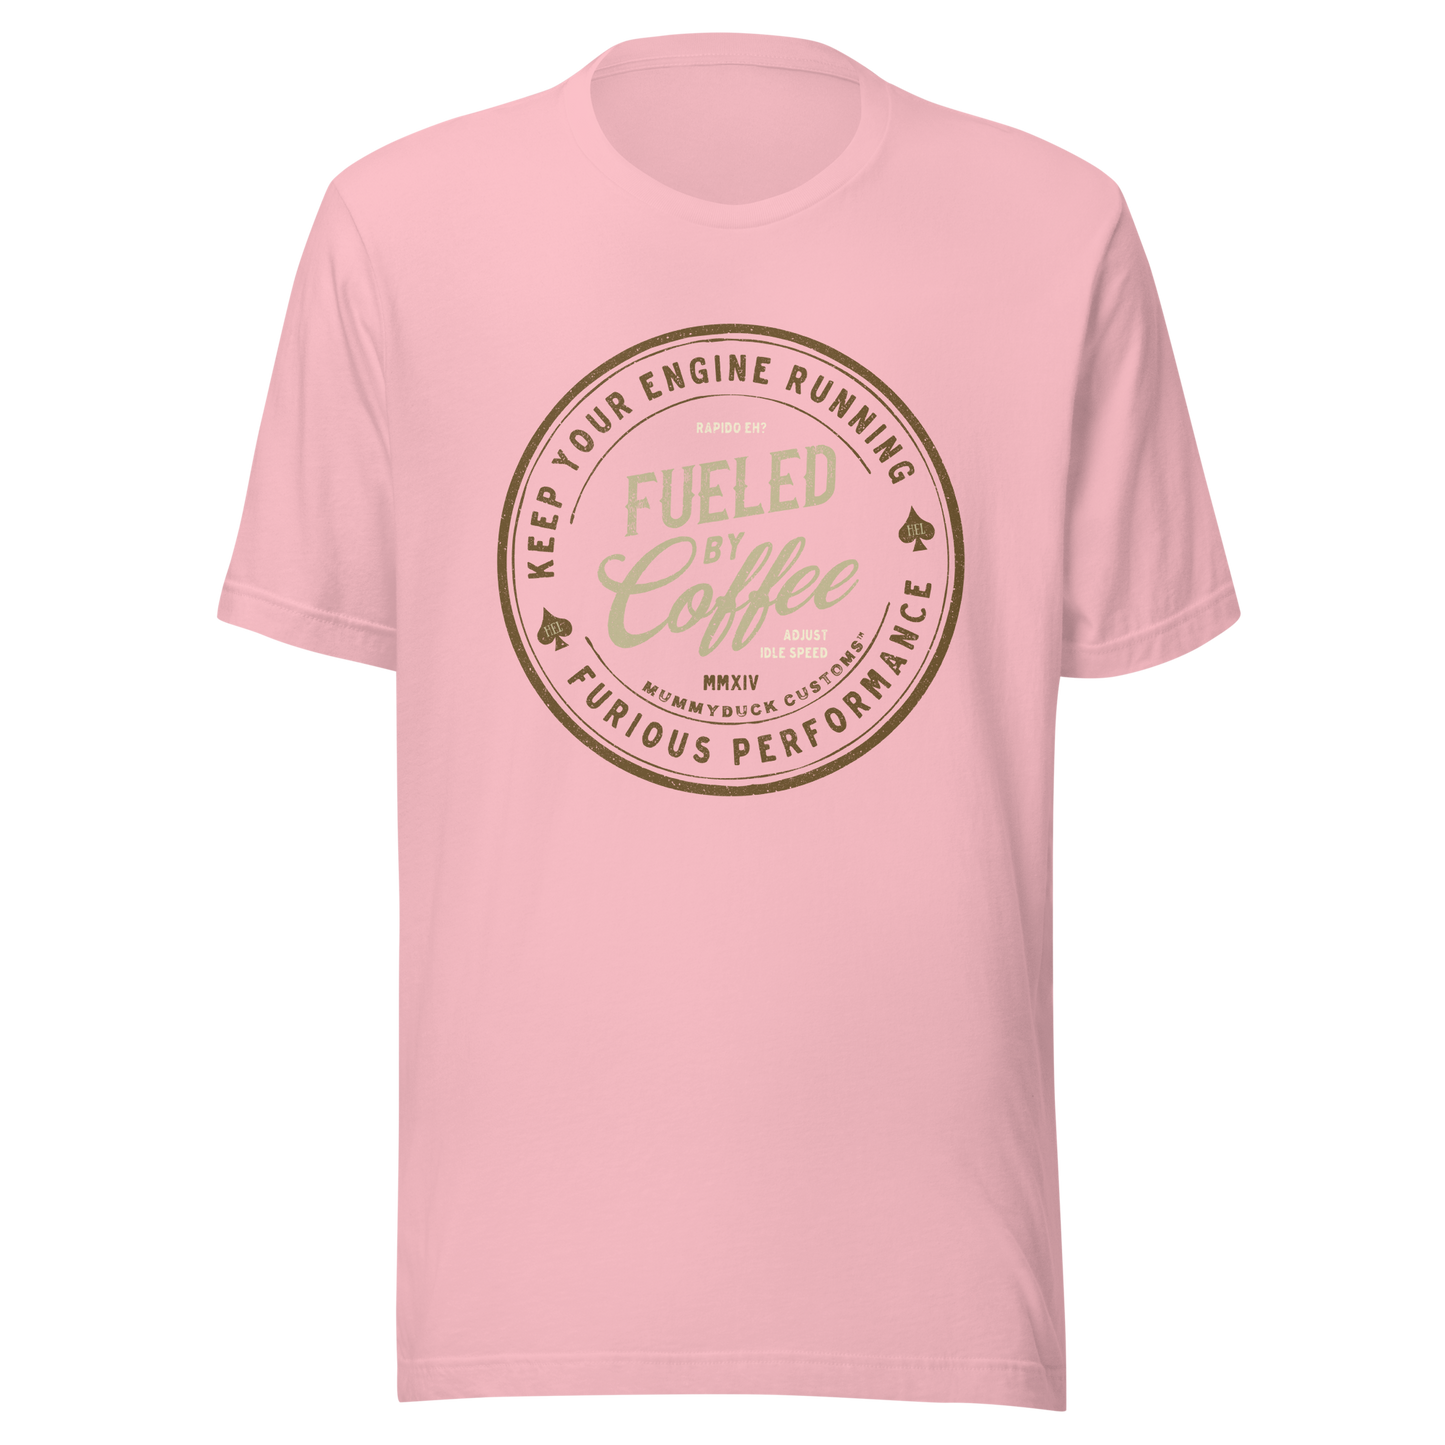 Fueled By Coffee t-shirt Idle Speed Shirt Coffee Drinking Shirts Fueled By Coffee Shirt Vintage Coffee Shirt Dad Fuel Mom Fuel Biker Fuel Shirt